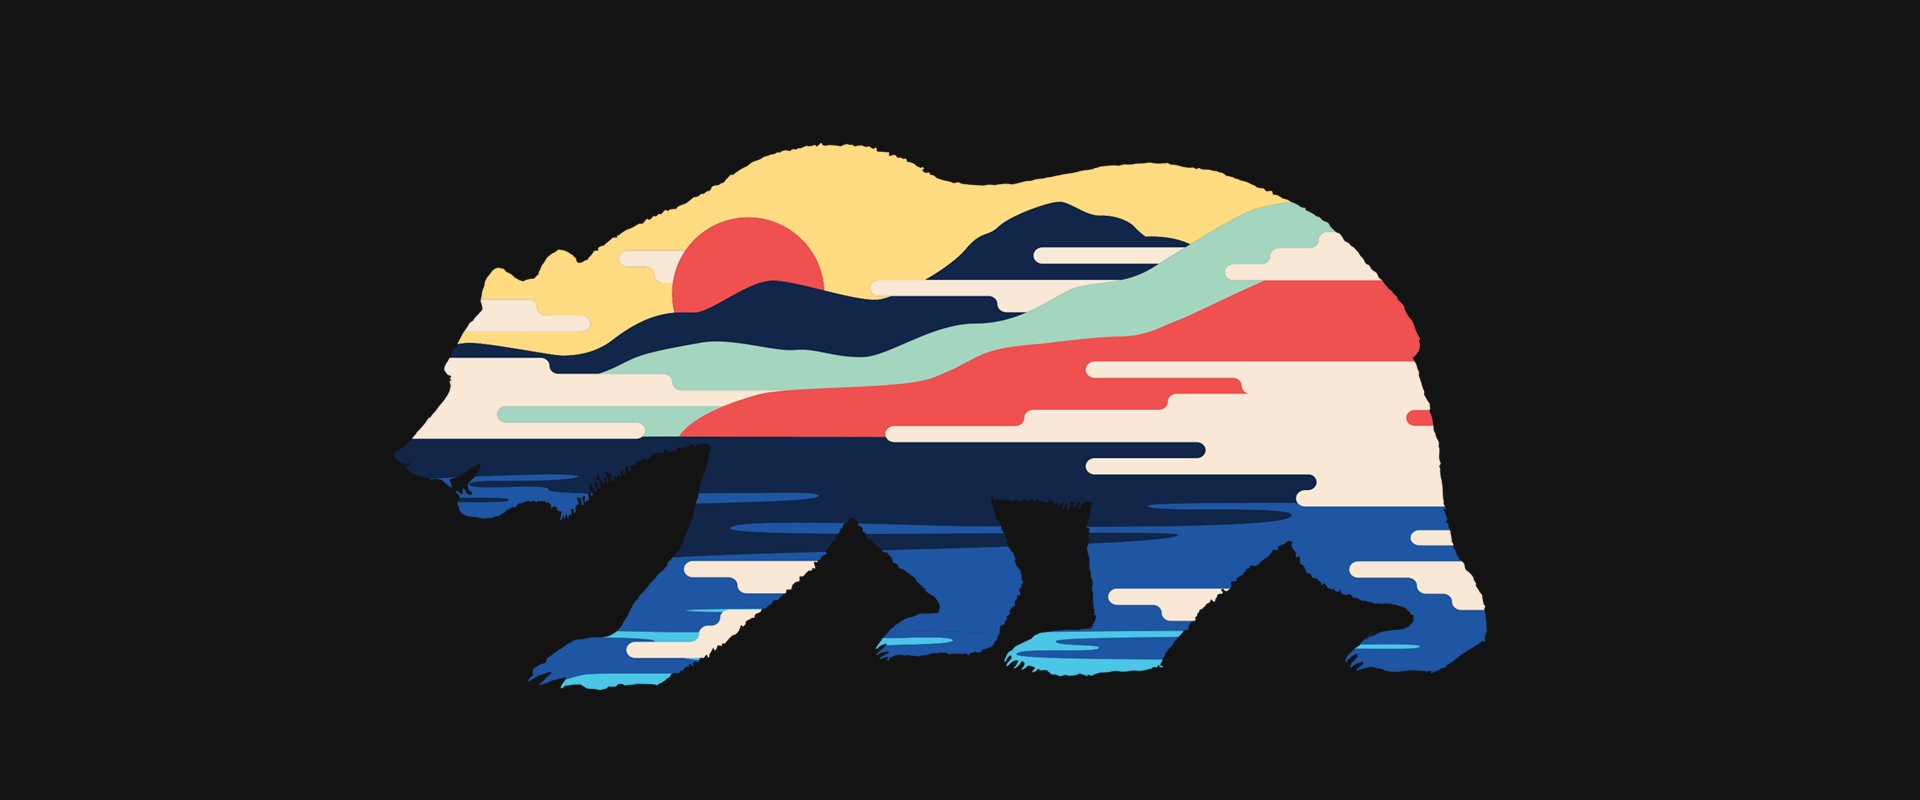 Black background with our "sunset bear" design featuring bear silhouette filled with water, mountains, sun, and coastline.